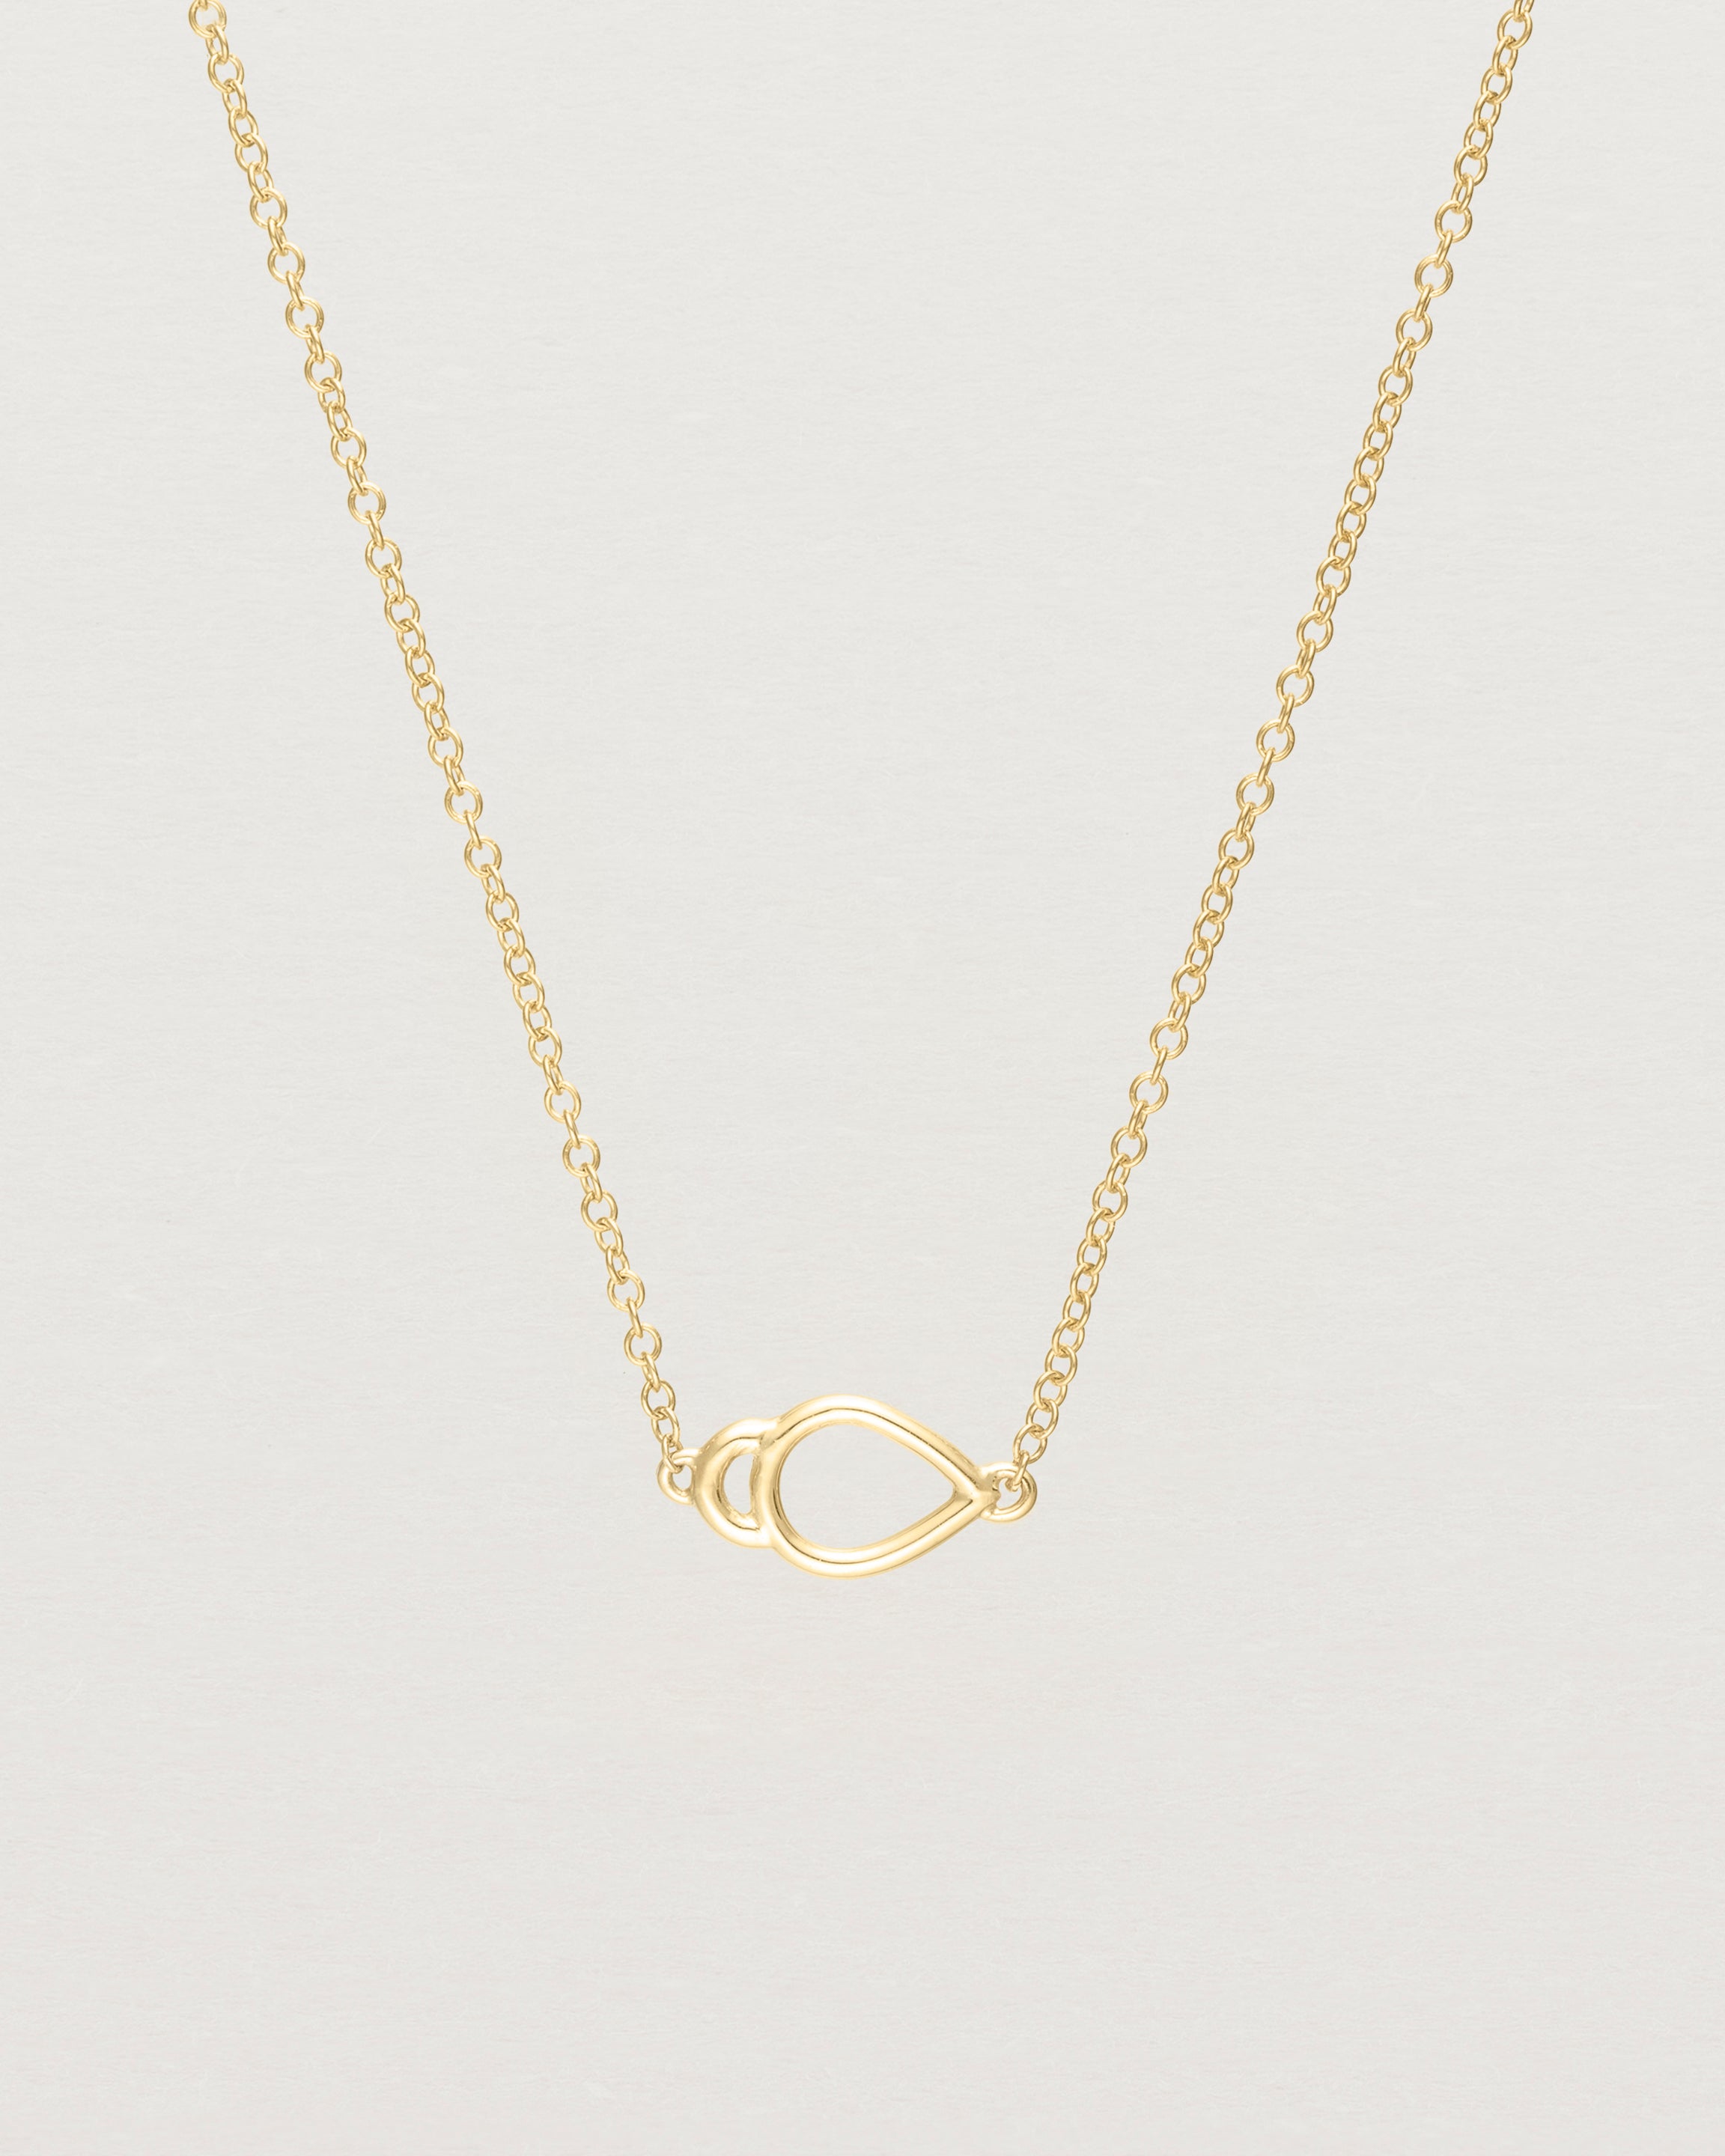 Close up of the Oana Necklace in Yellow Gold.